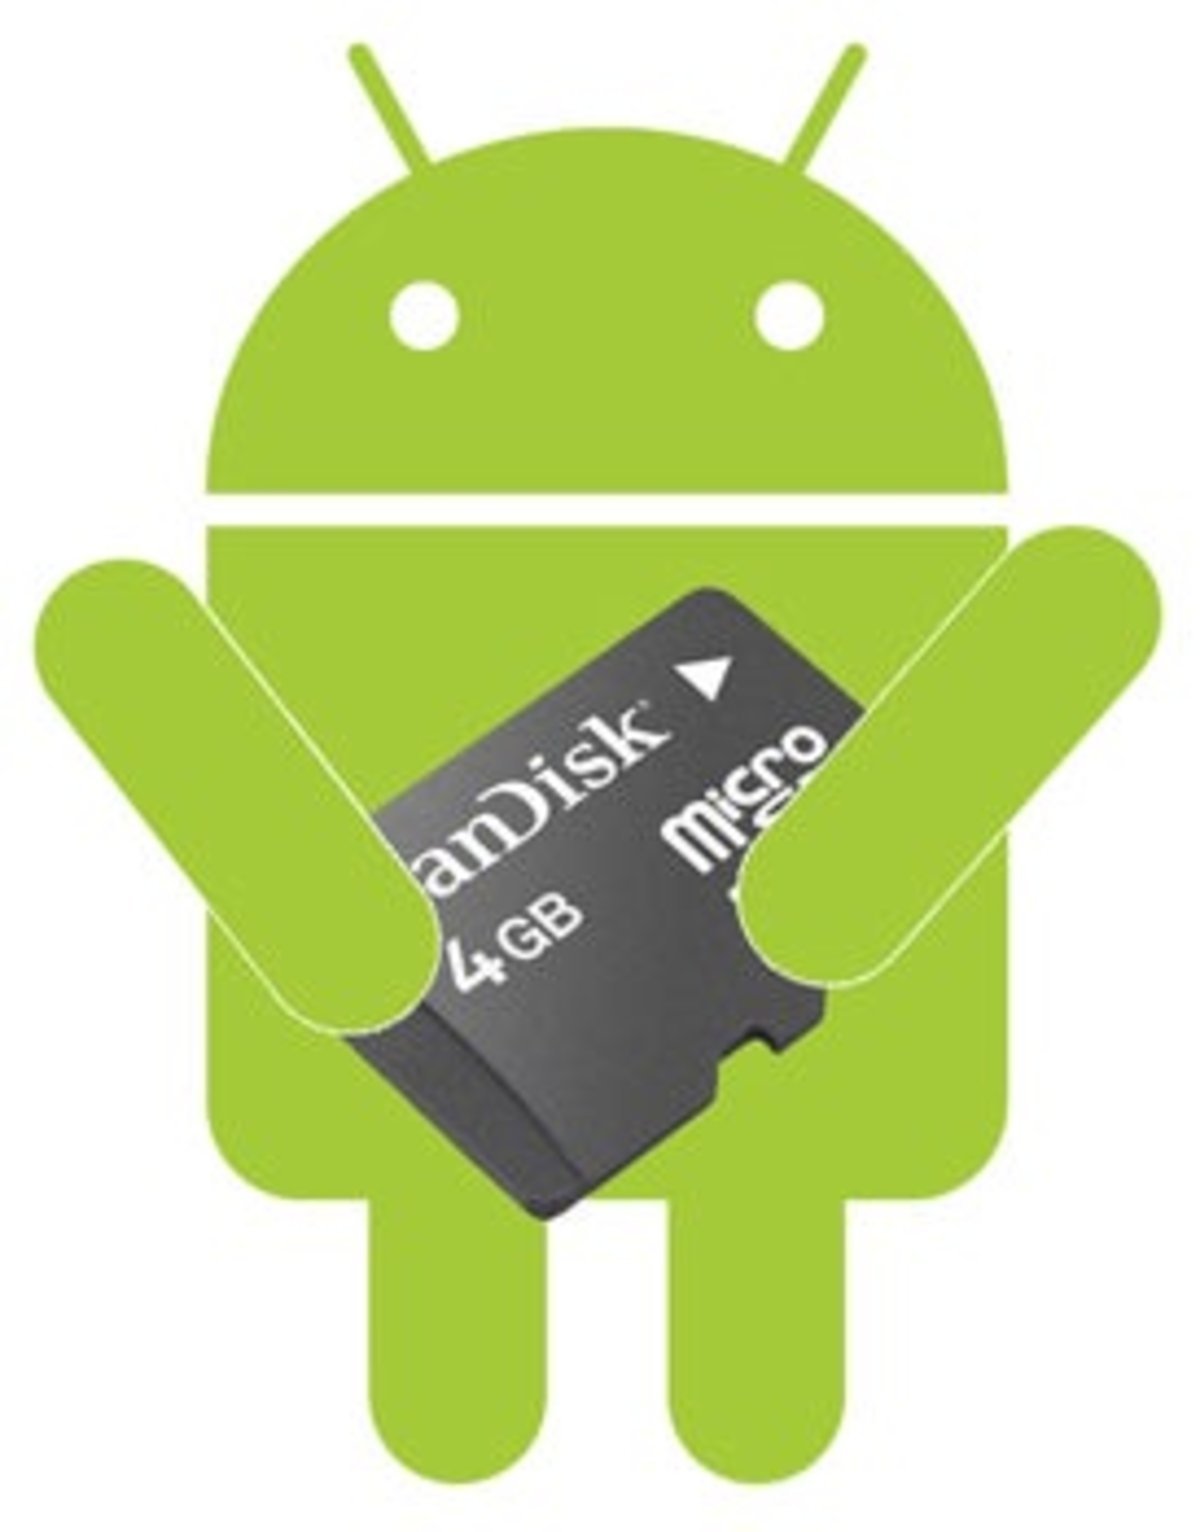 Android y SD